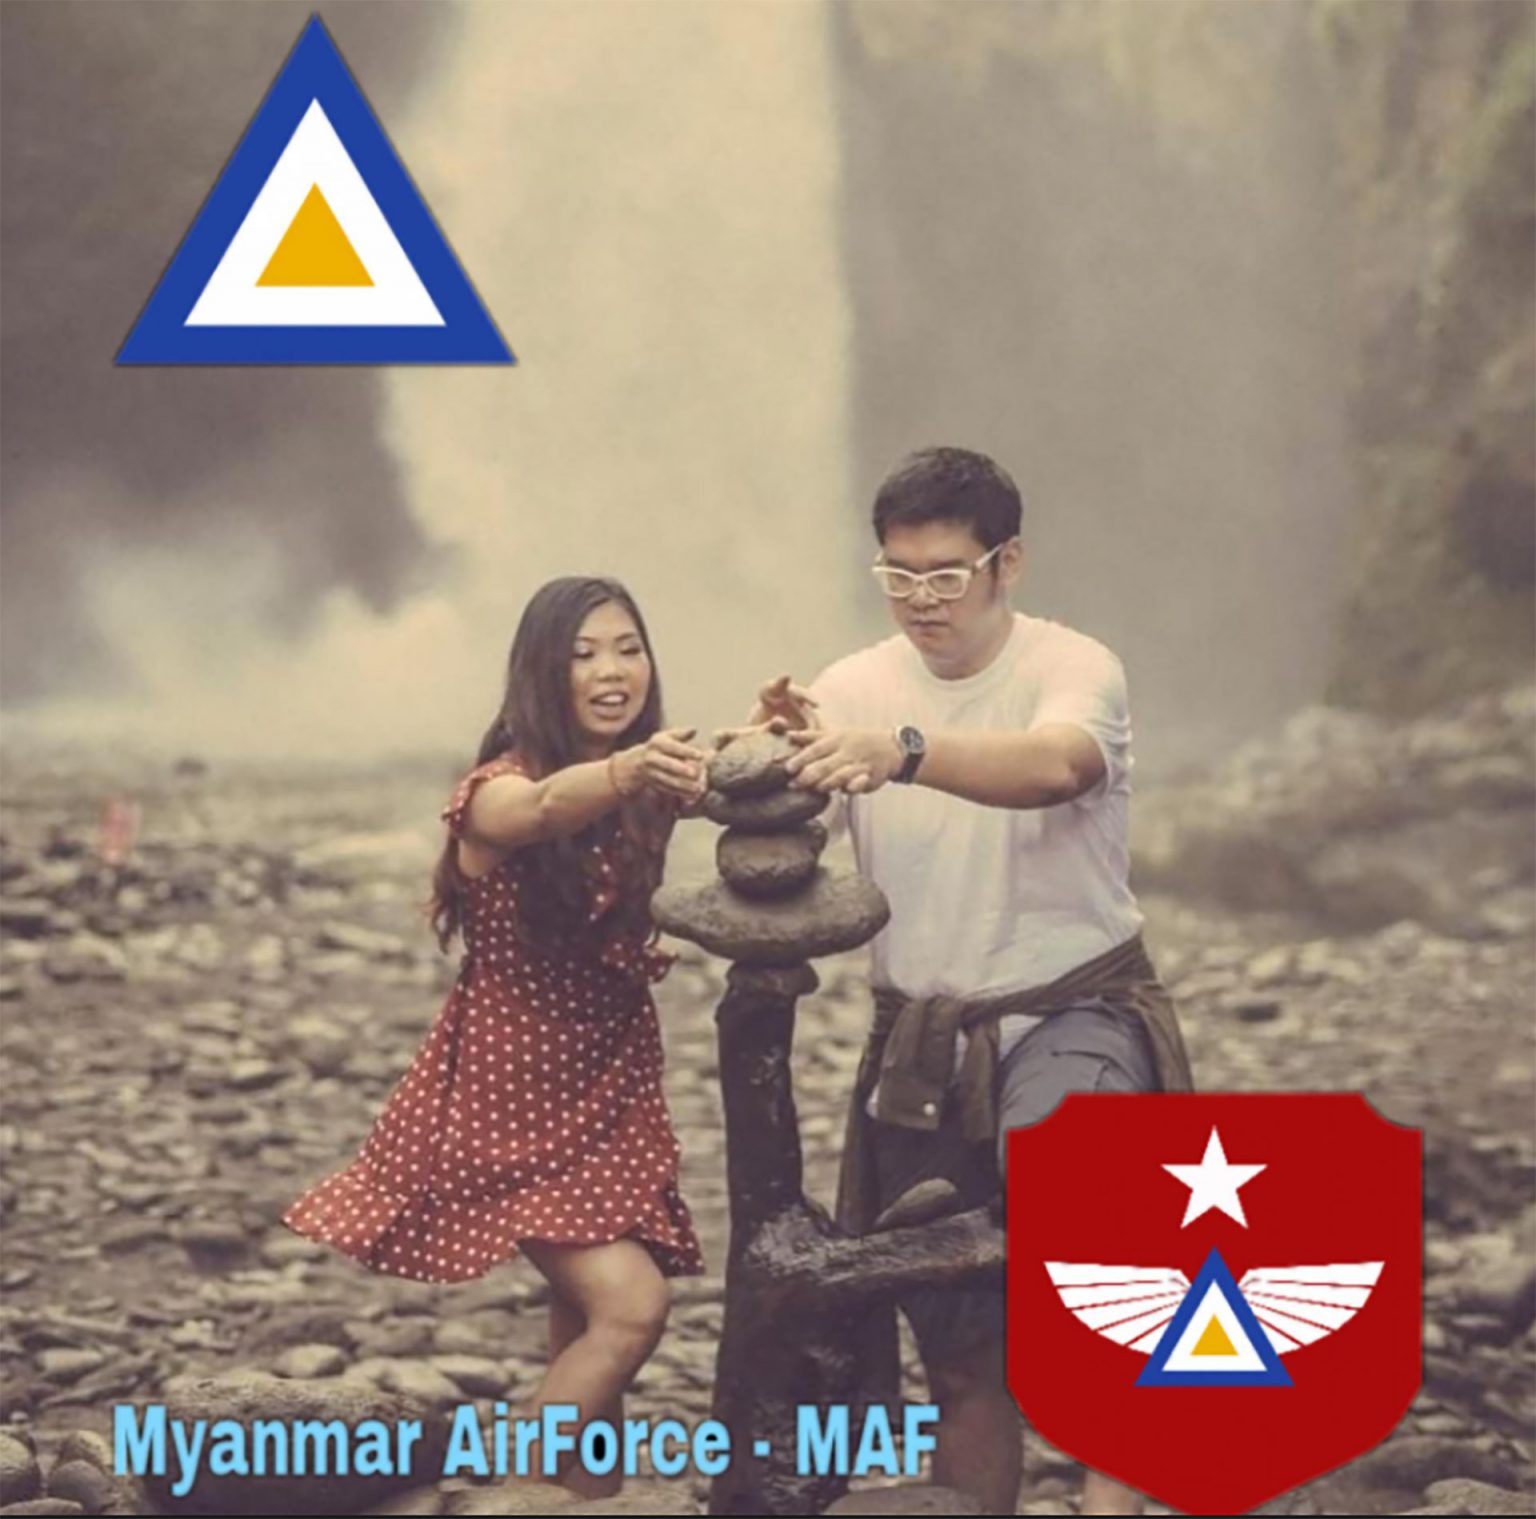 The Facebook profile picture of former Air Force chief General Maung Maung Kyaw’s son Ivan Htet and his wife Lin Let Thiri.